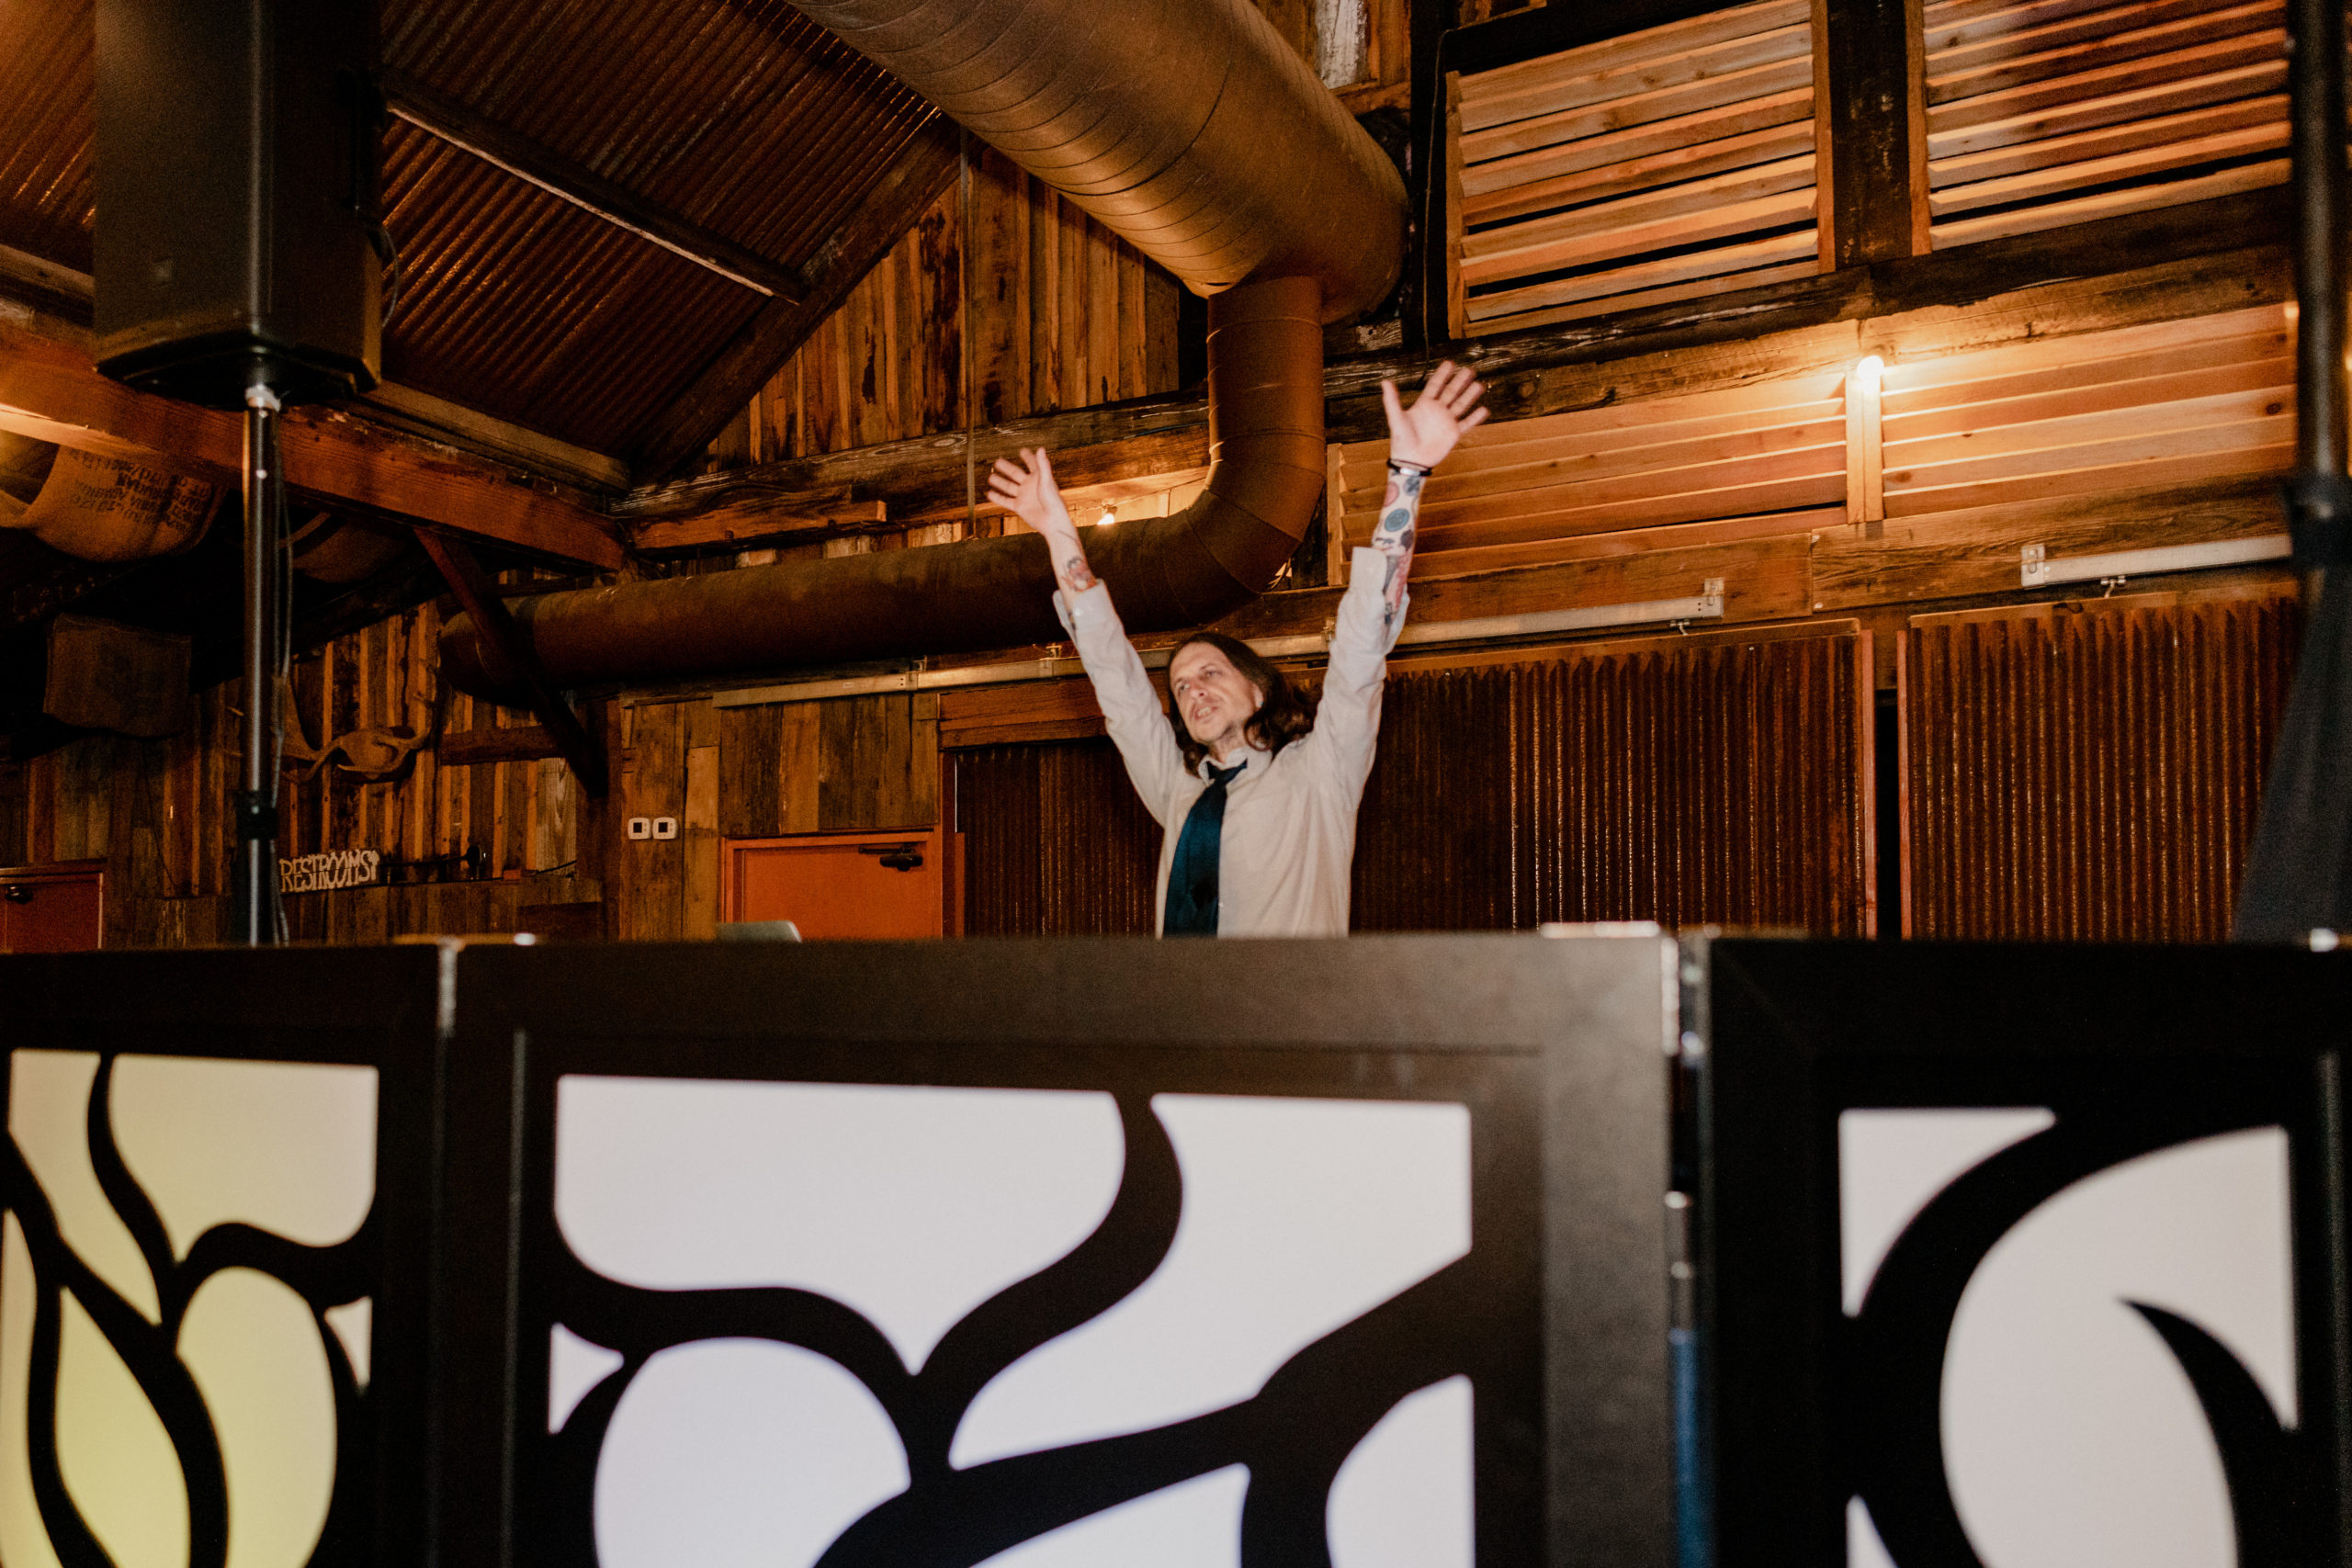 DJ with hands up in the air at a DJ Booth